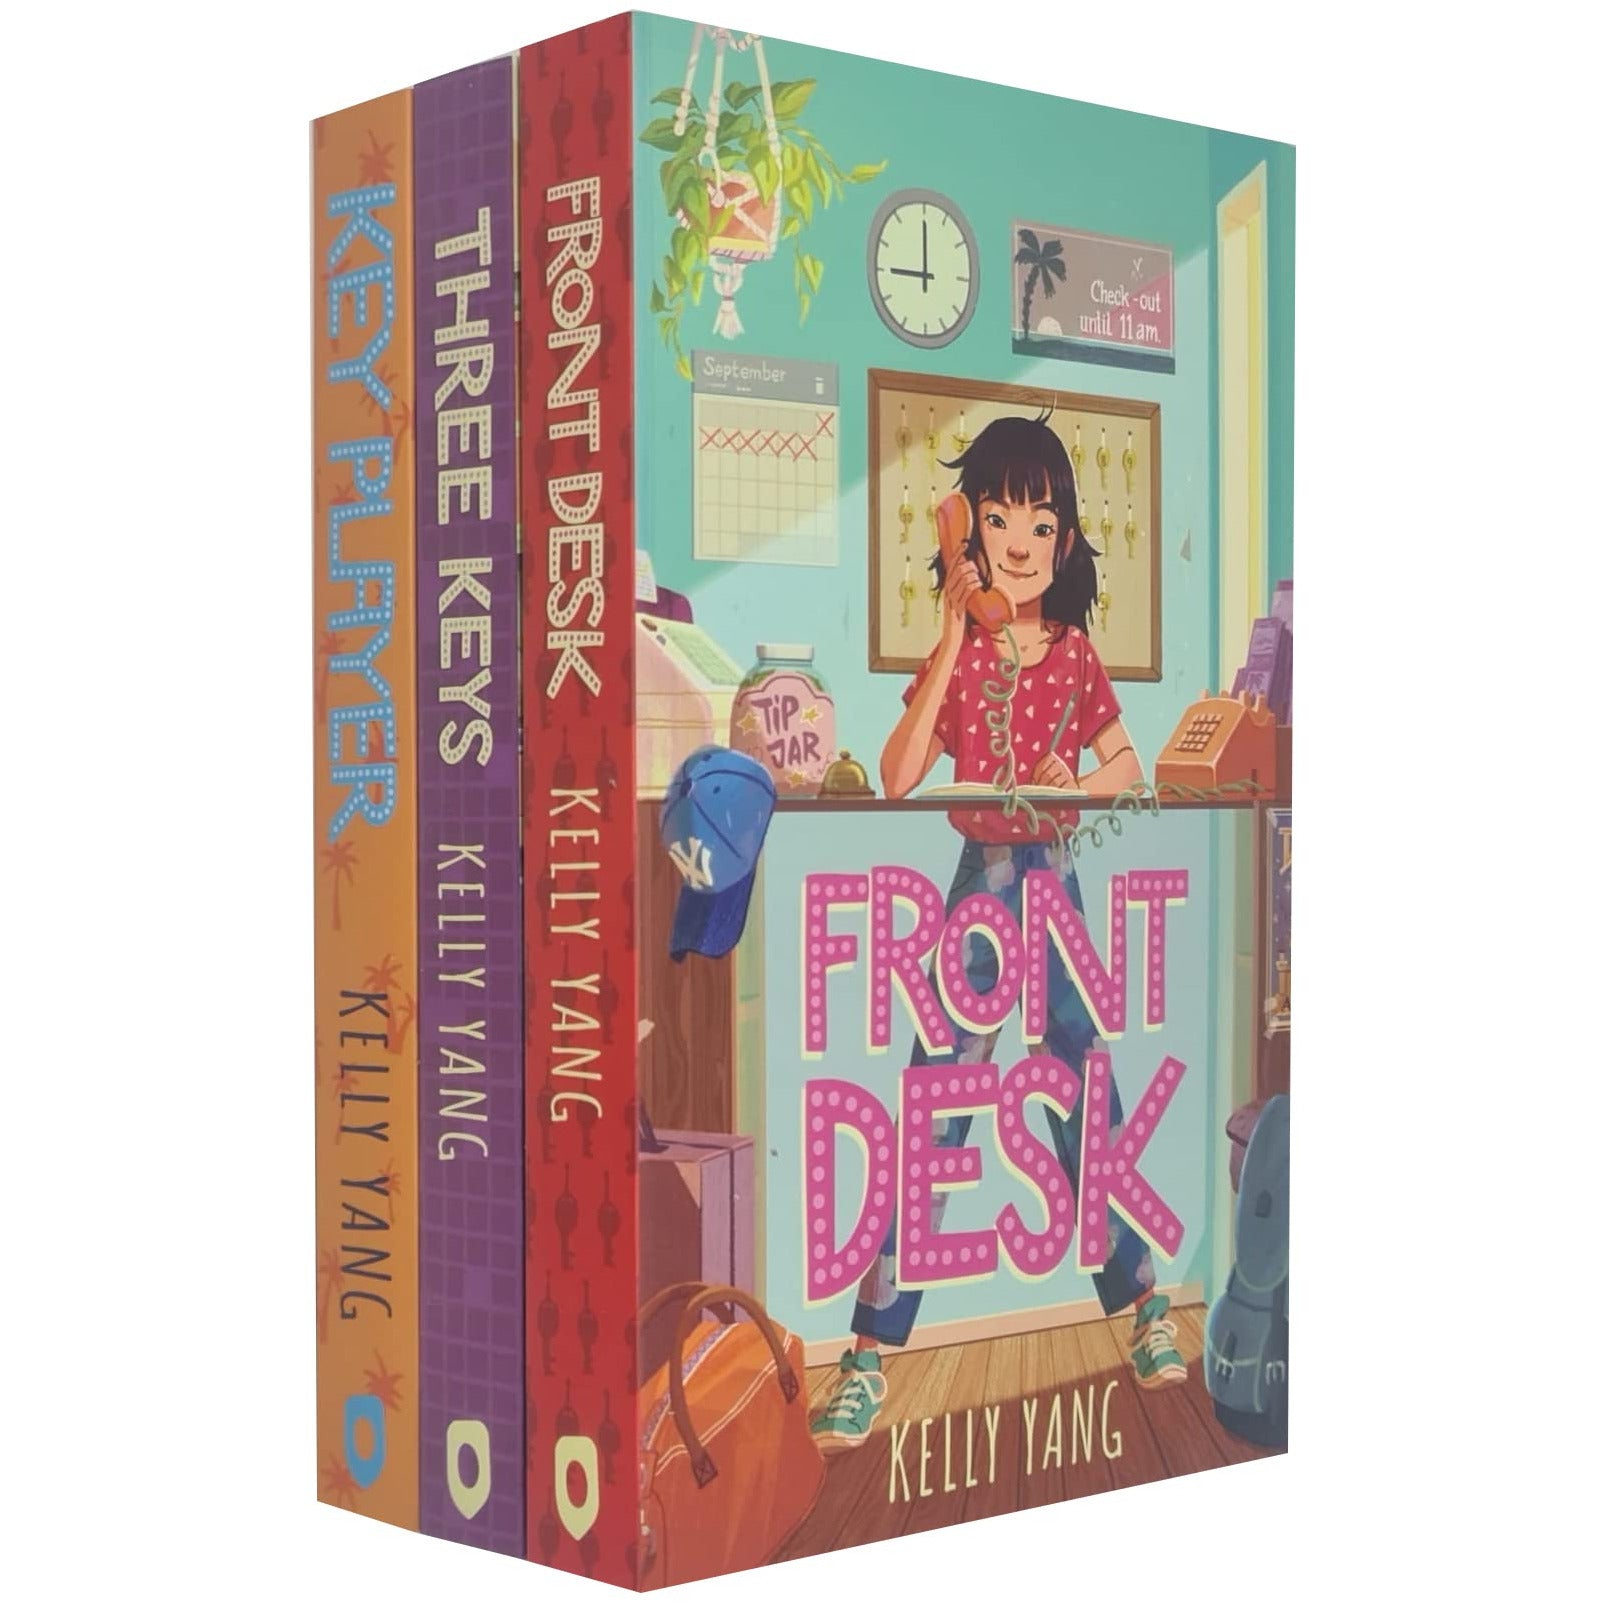 Front Desk by Kelly Yang: 9781984846082 | : Books